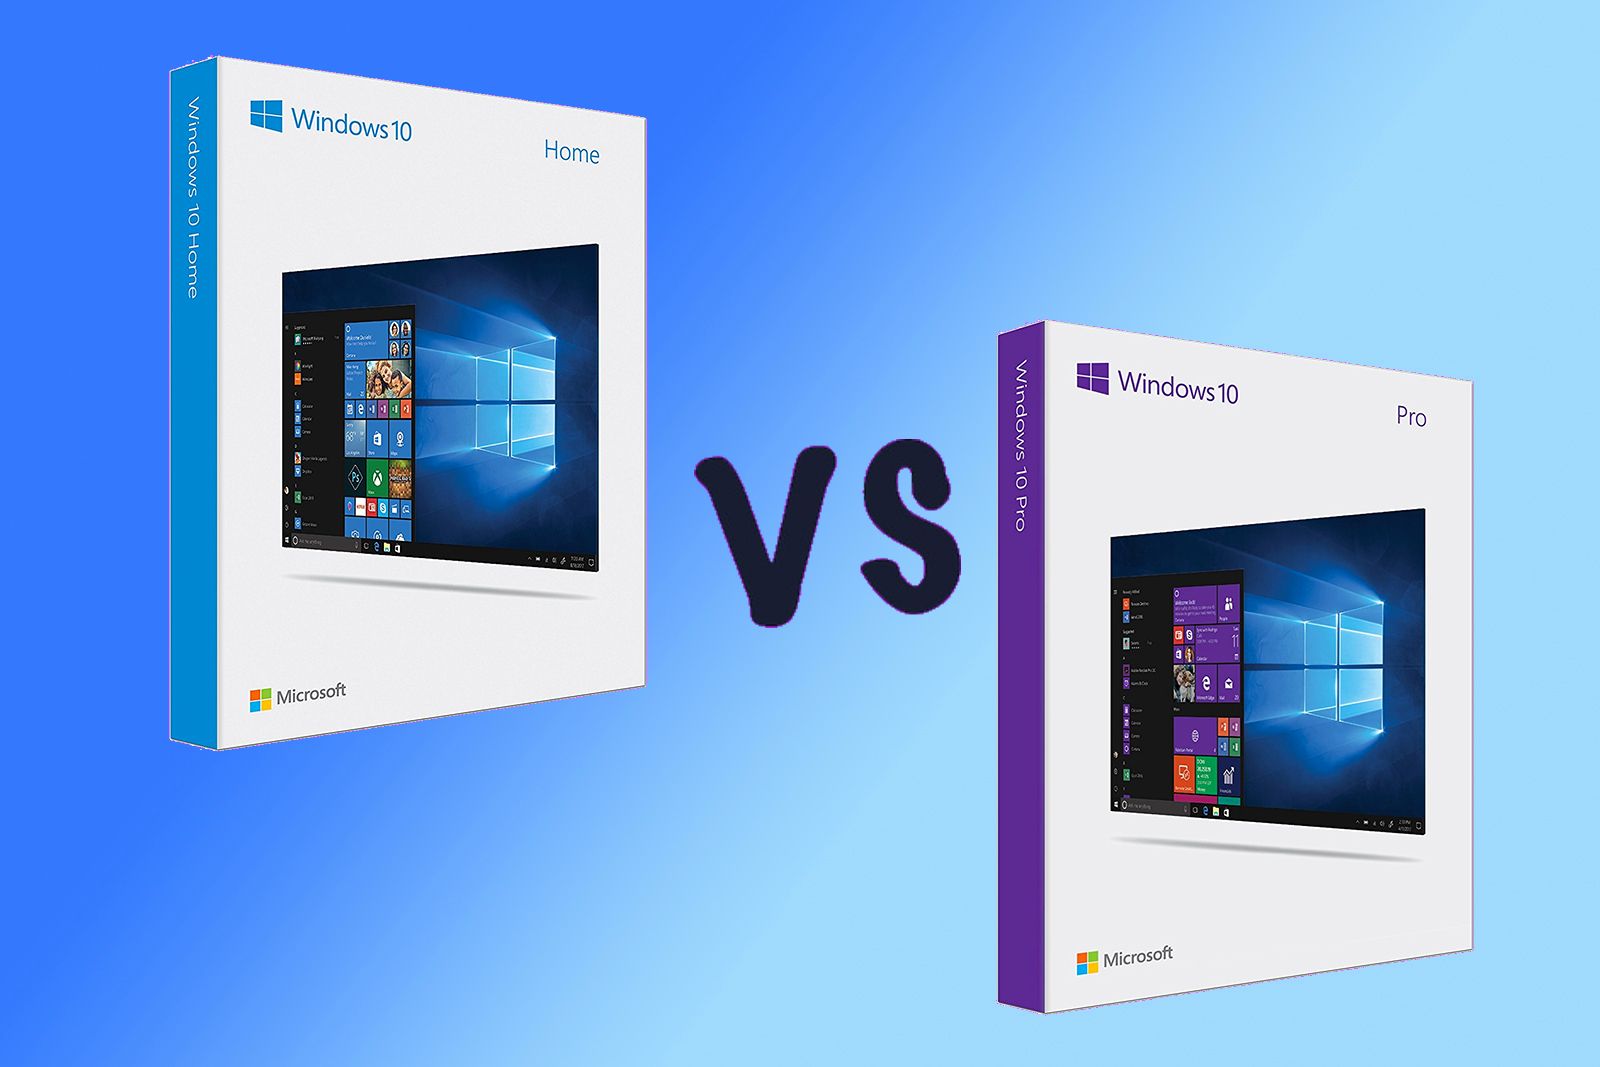 Windows 10 vs Windows 10 Pro whats the difference image 1